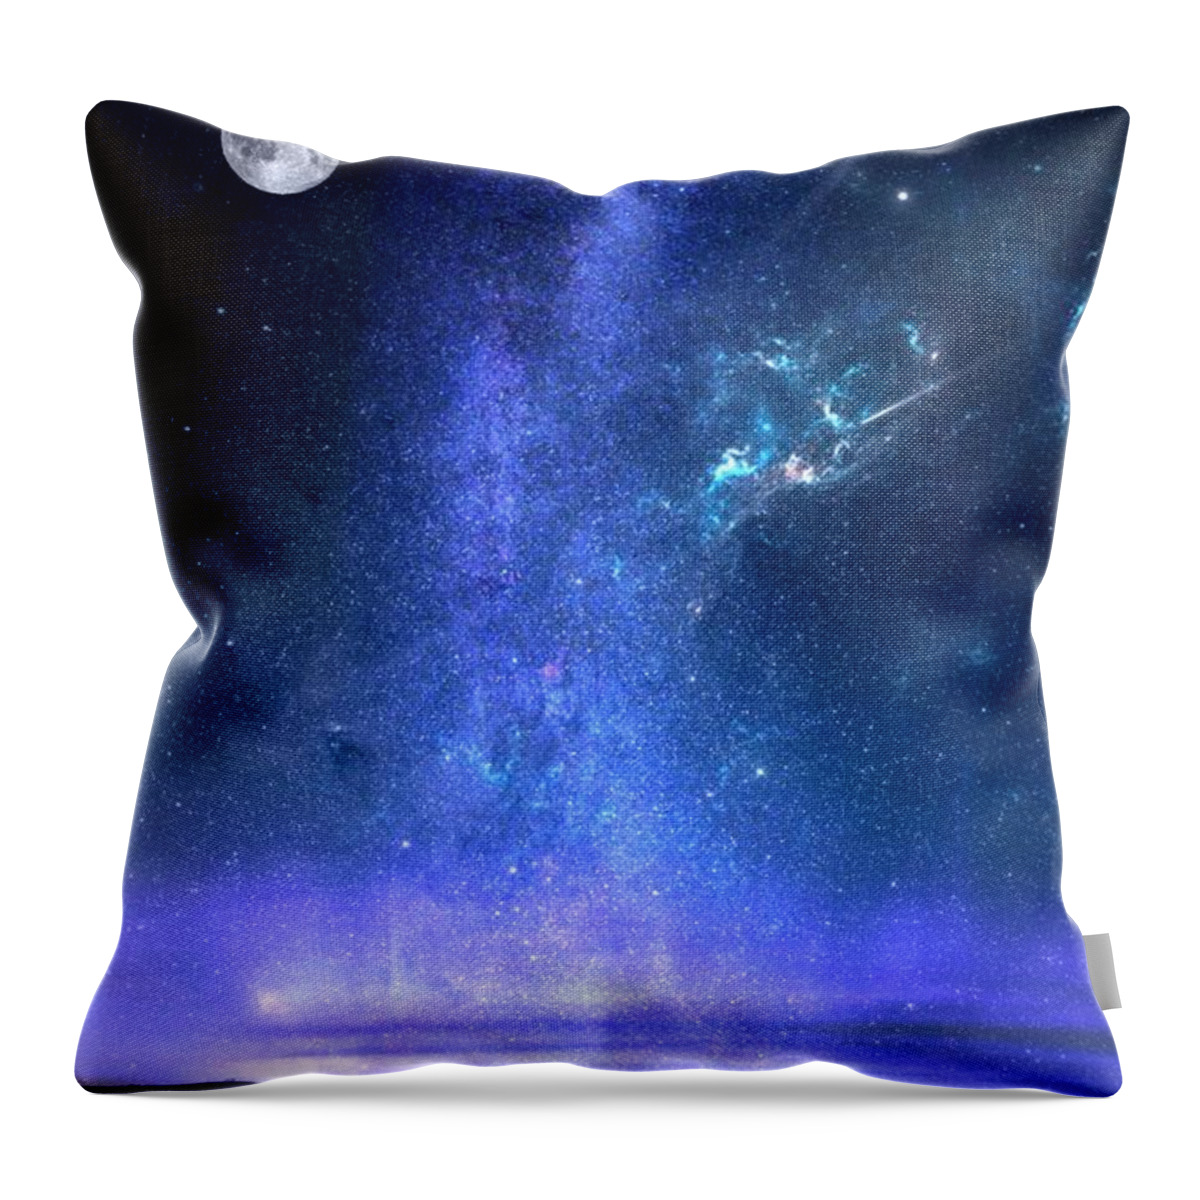 Looking Up Throw Pillow featuring the painting Looking Up by Mark Taylor